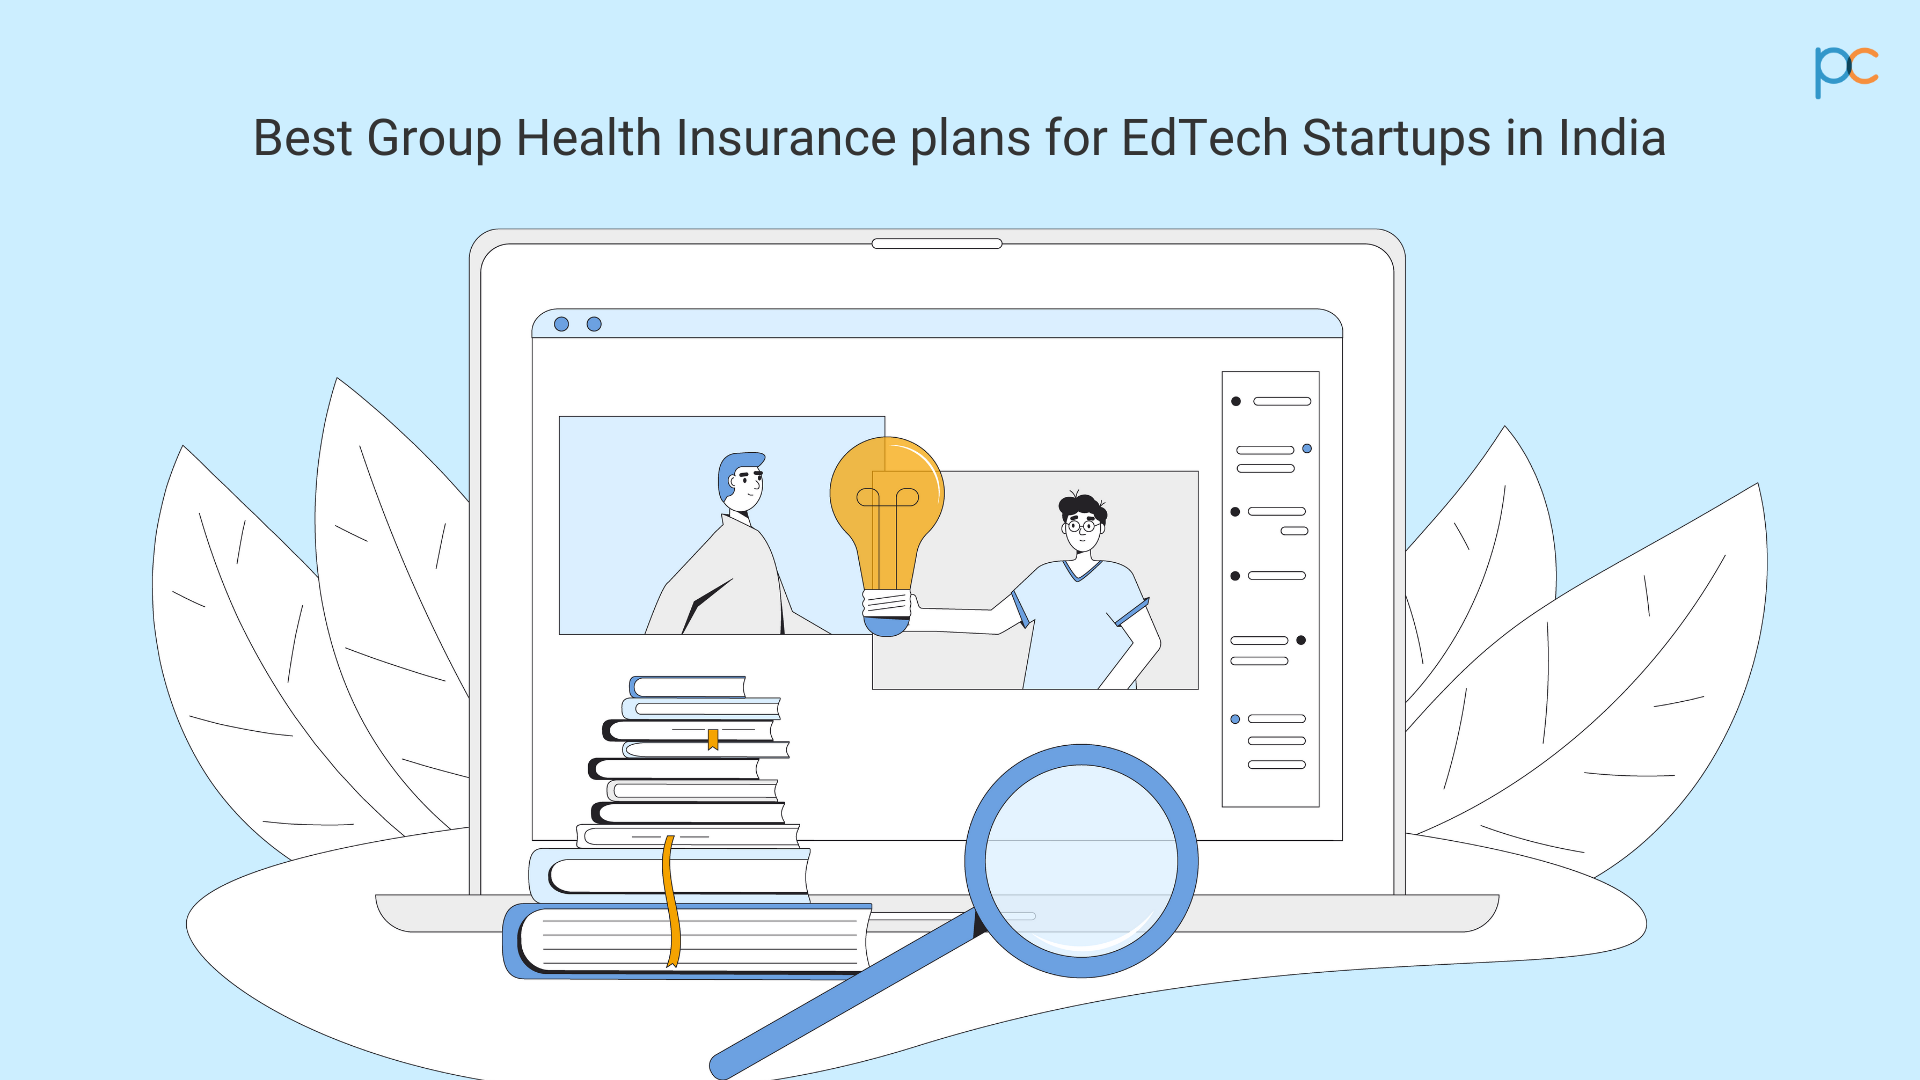 best group health insurance plans for edtech startups in india - plancover - small business insurance